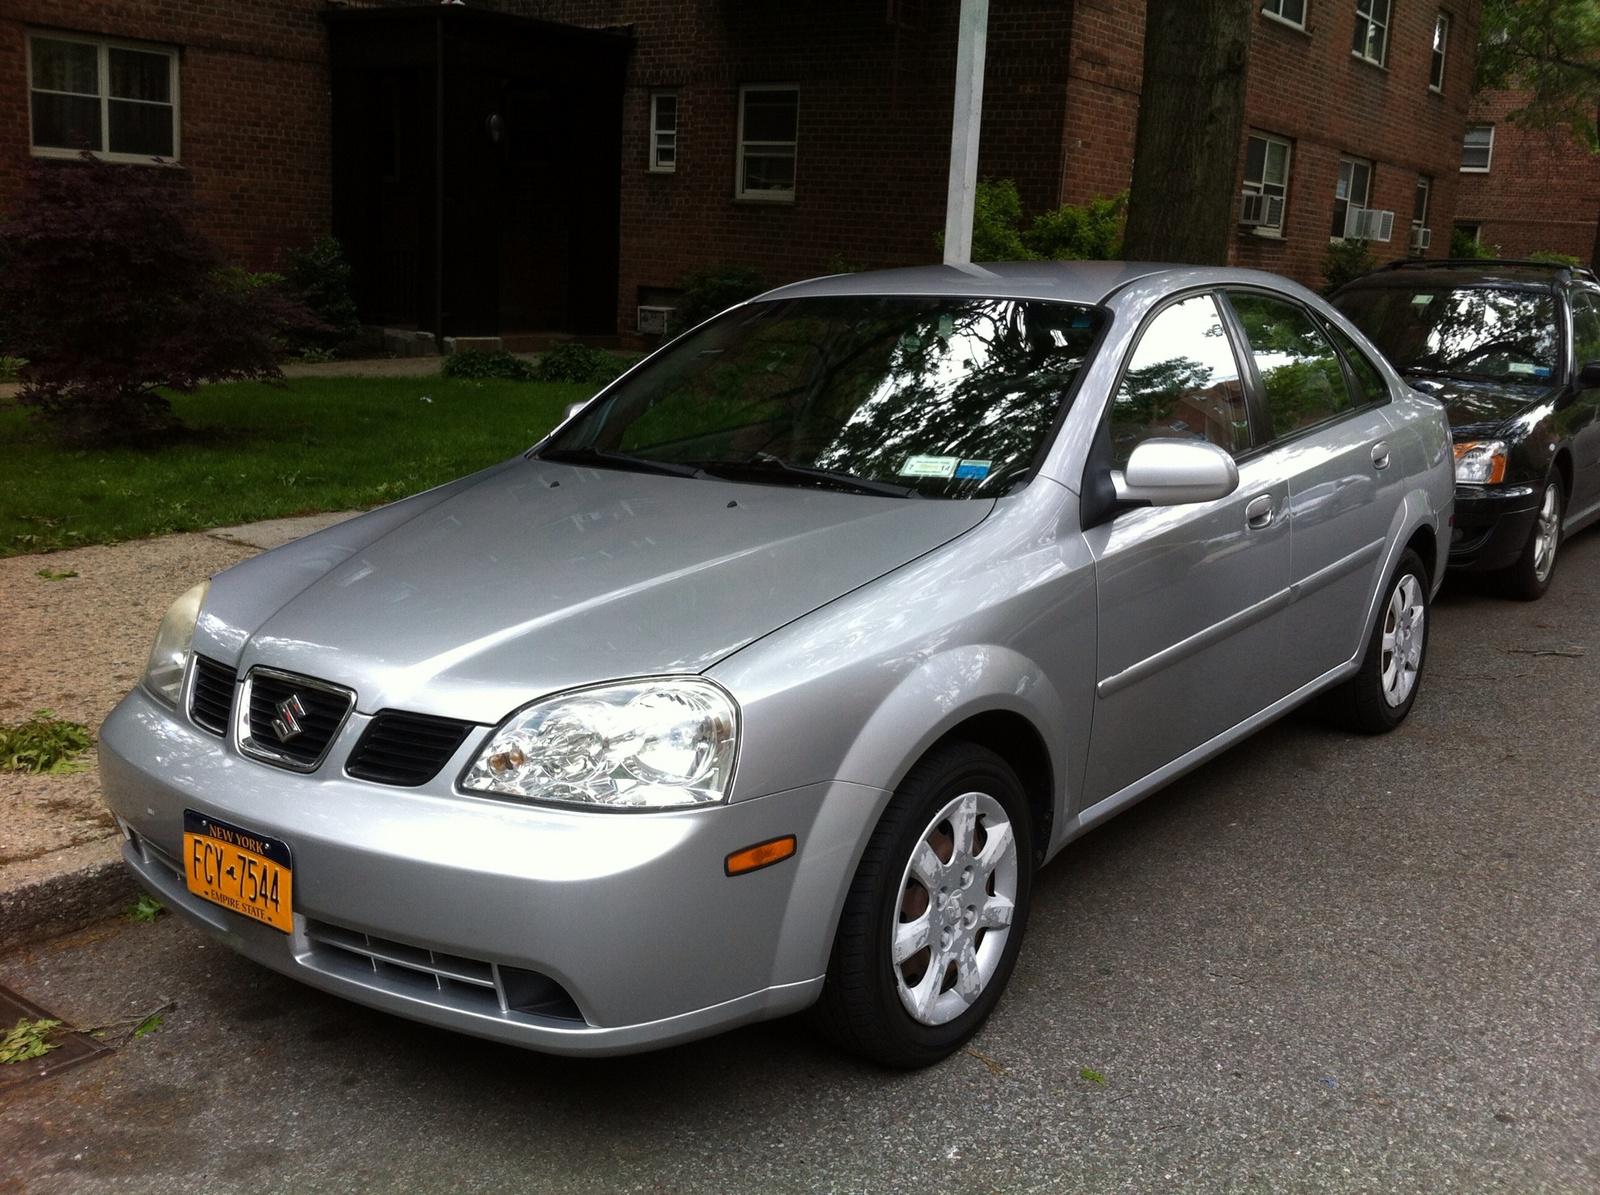 2005 Suzuki Forenza. The official car of the "global market", coming with a  who gives a shit inline 4, and constantly leaking oil because it's a  Daewoo, and also GM. : r/regularcarreviews